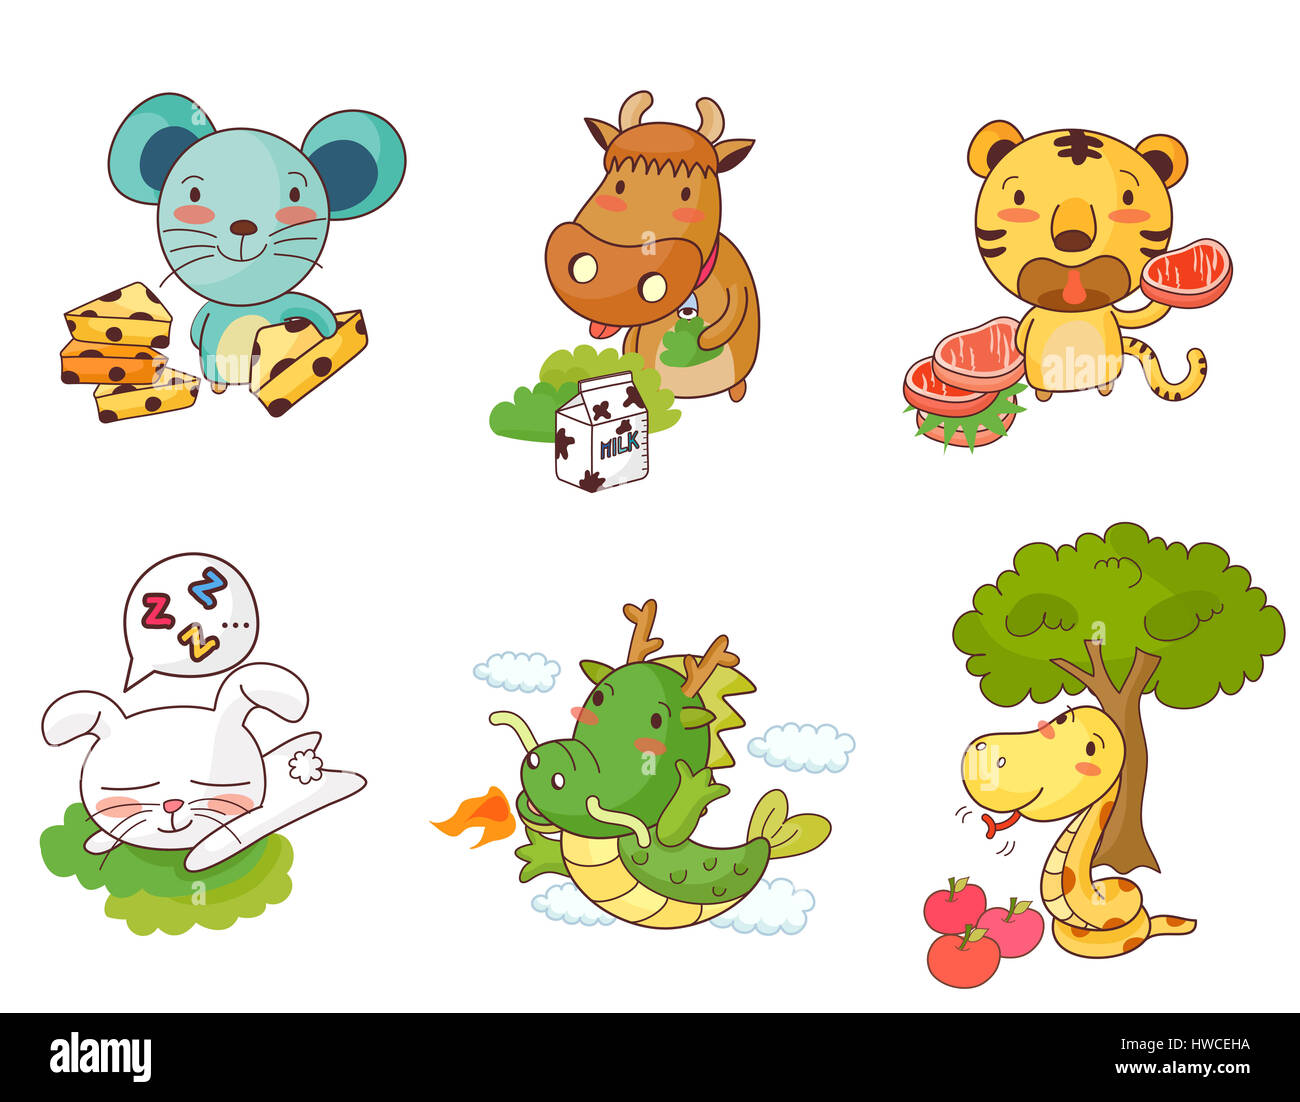 alphabet,animal themes,apple,arrangement,bizarre,box,cat,cloud,collection,color image,concepts,creativity,crocodile,depiction,display,domestic,domestic animal,endangered species,food and drink,freshness,front view,fruit,grass,healthy eating,hippopotamus,horizontal,horn,humor,ideas,illustration and Stock Photo